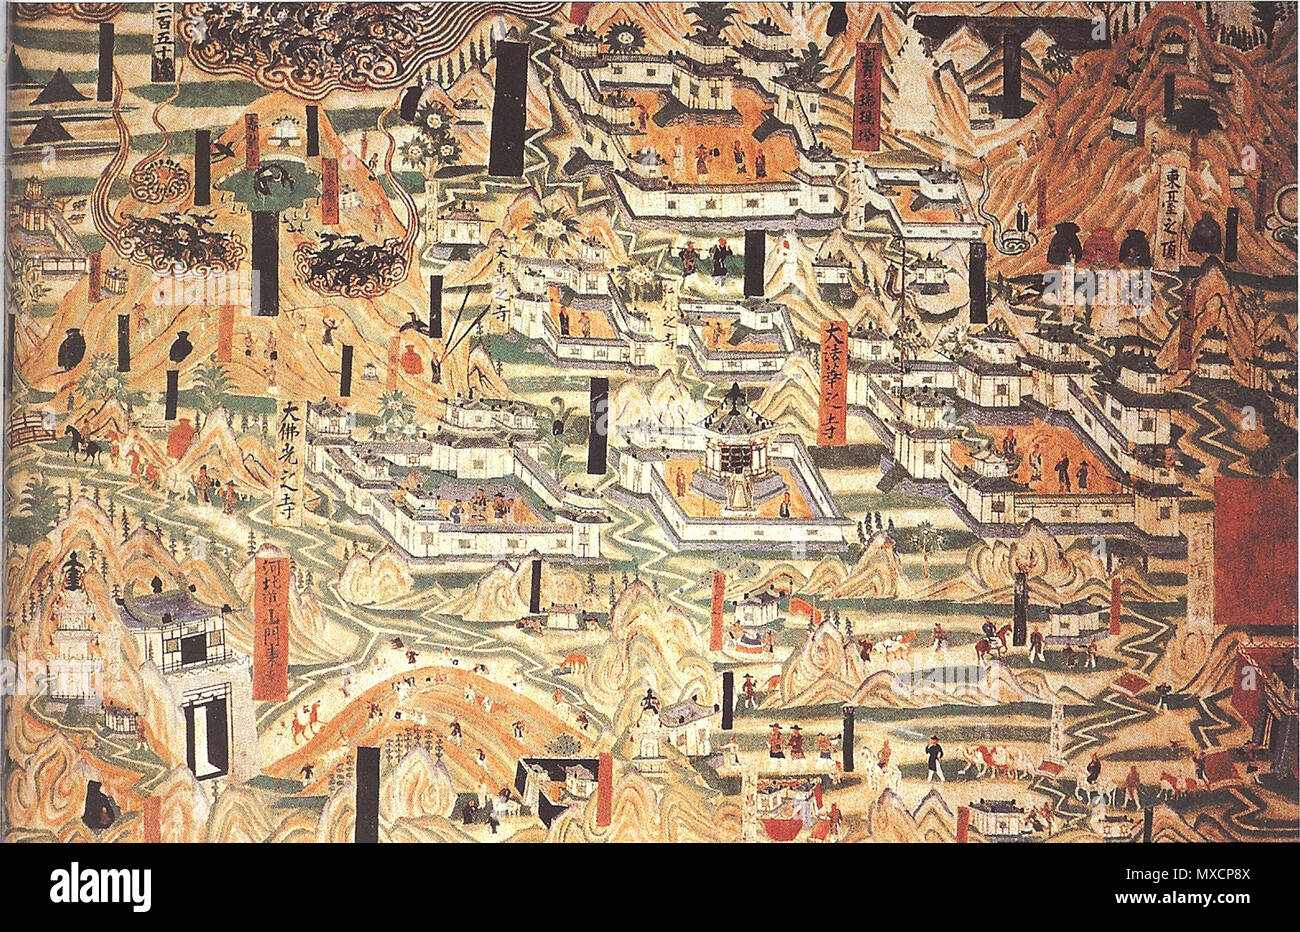 . A mural painting from Cave 61 at the Mogao Caves, Dunhuang, Gansu province, China, dated to the 10th century and depicting Tang Dynasty monastic architecture from Mount Wutai, Shanxi province. 10th century. Chinese artist(s) from the 10th century 422 Mogao Cave 61, painting of Mount Wutai monasteries Stock Photo